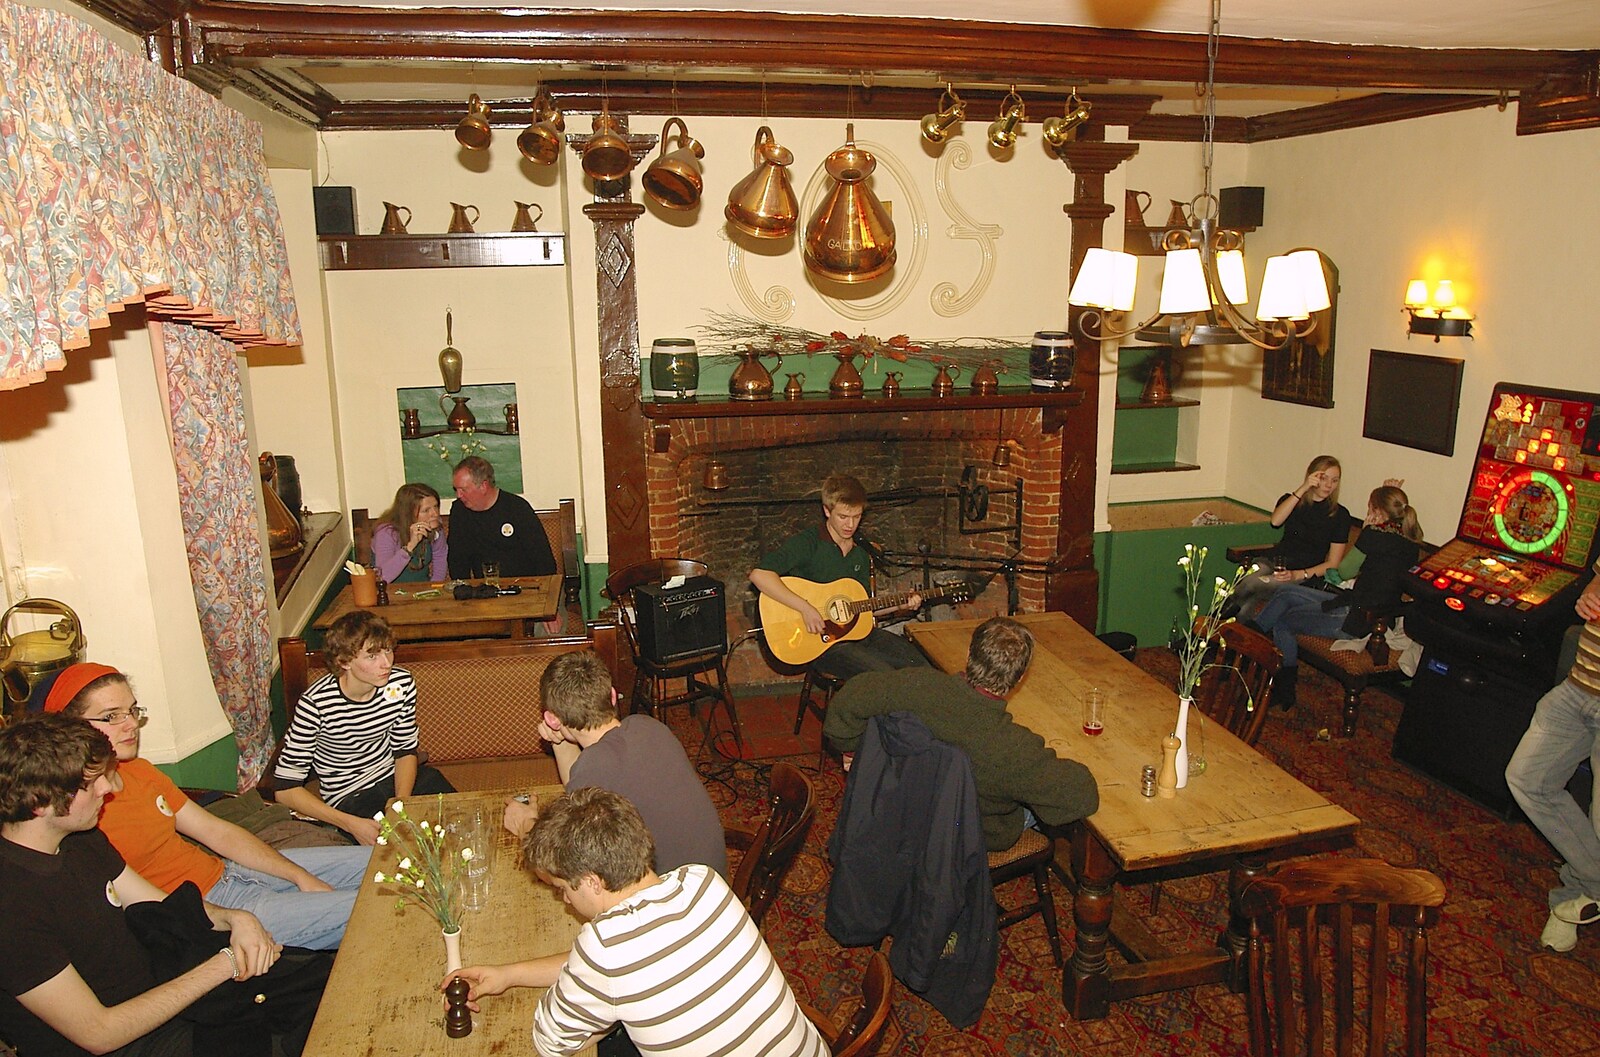 Playing in the lounge of the Scole Inn from Rory Hill's "Tour in a Night", Norfolk and Suffolk - 17th November 2006